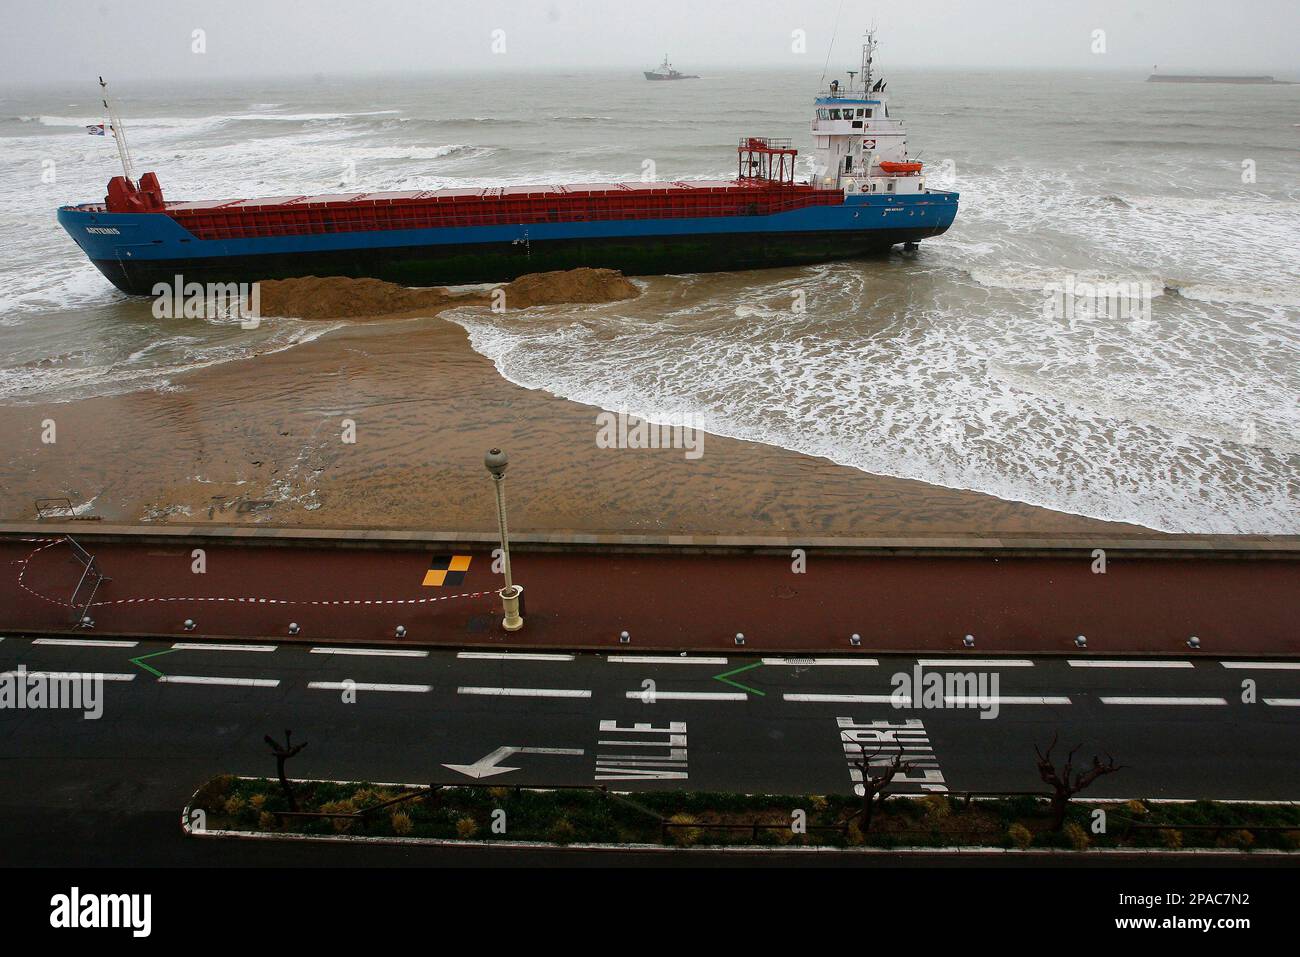 The 'Artemis', a Dutch cargo ship which ran aground Monday after high winds pushed it off course, is seen on a beach at Les Sables d'Olonne in western France, Tuesday, March 11, 2008. (AP Photo/David Vincent) Stock Photo